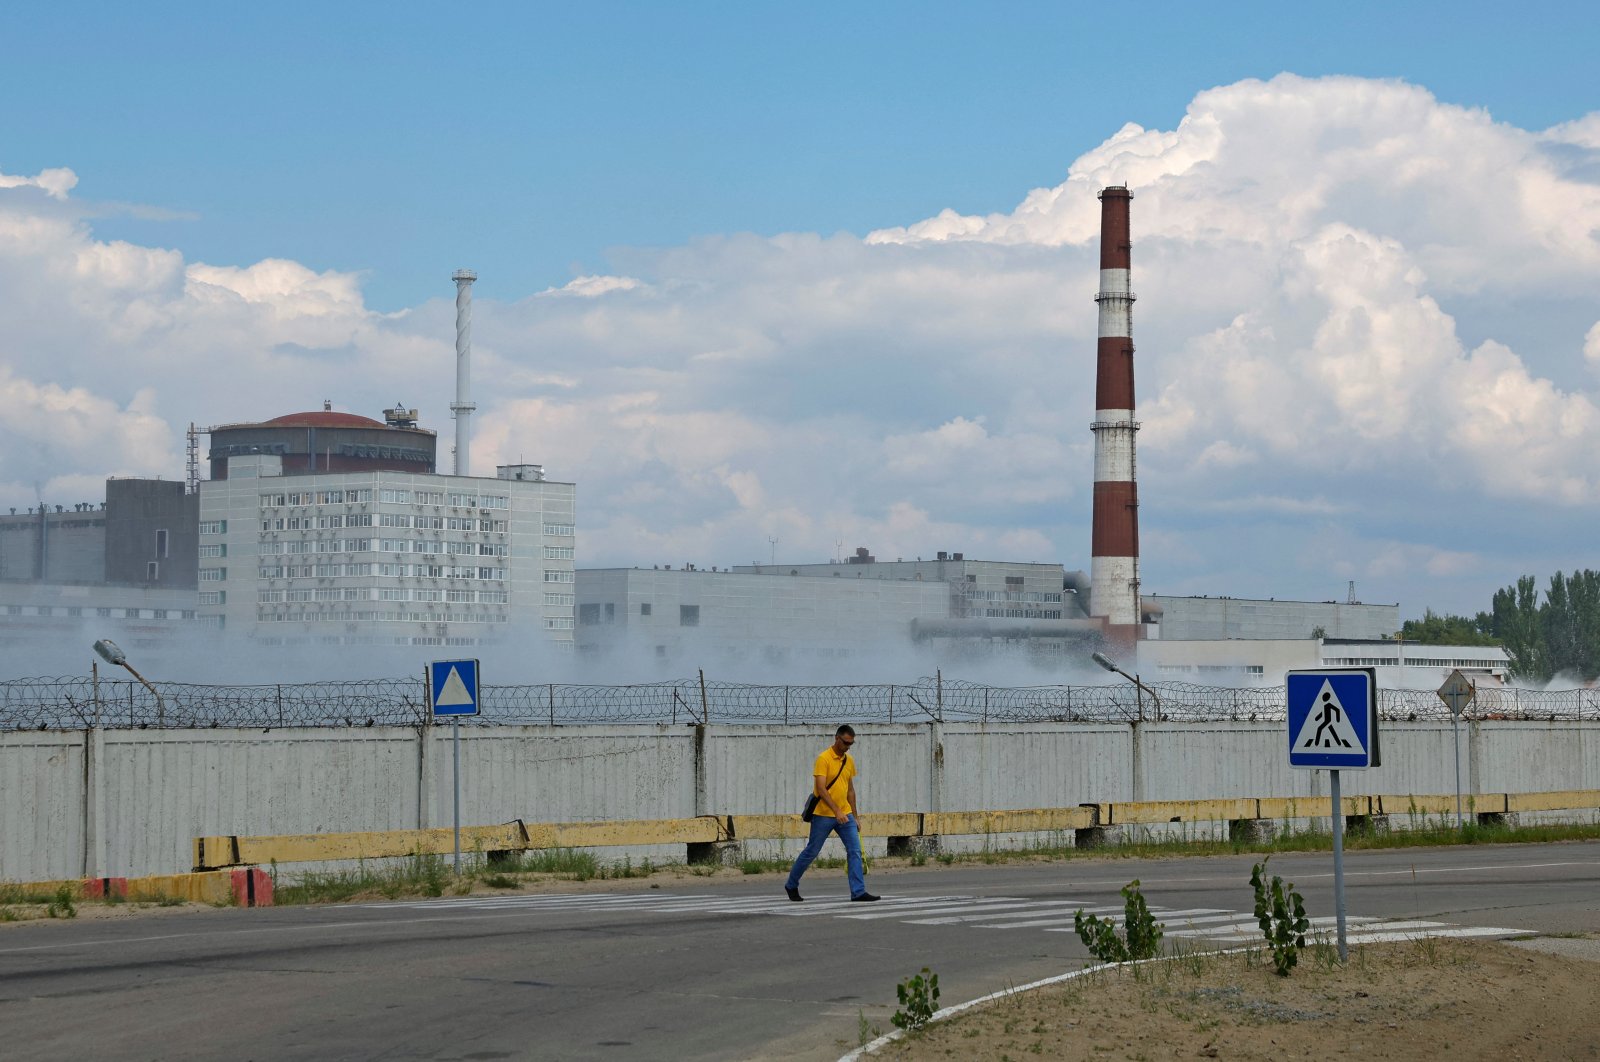 A man crosses a road near the Zaporizhzhia Nuclear Power Plant in the course of Ukraine-Russia conflict outside the Russian-controlled city of Enerhodar in the Zaporizhzhia region, Ukraine, Aug. 4, 2022. (Reuters Photo)